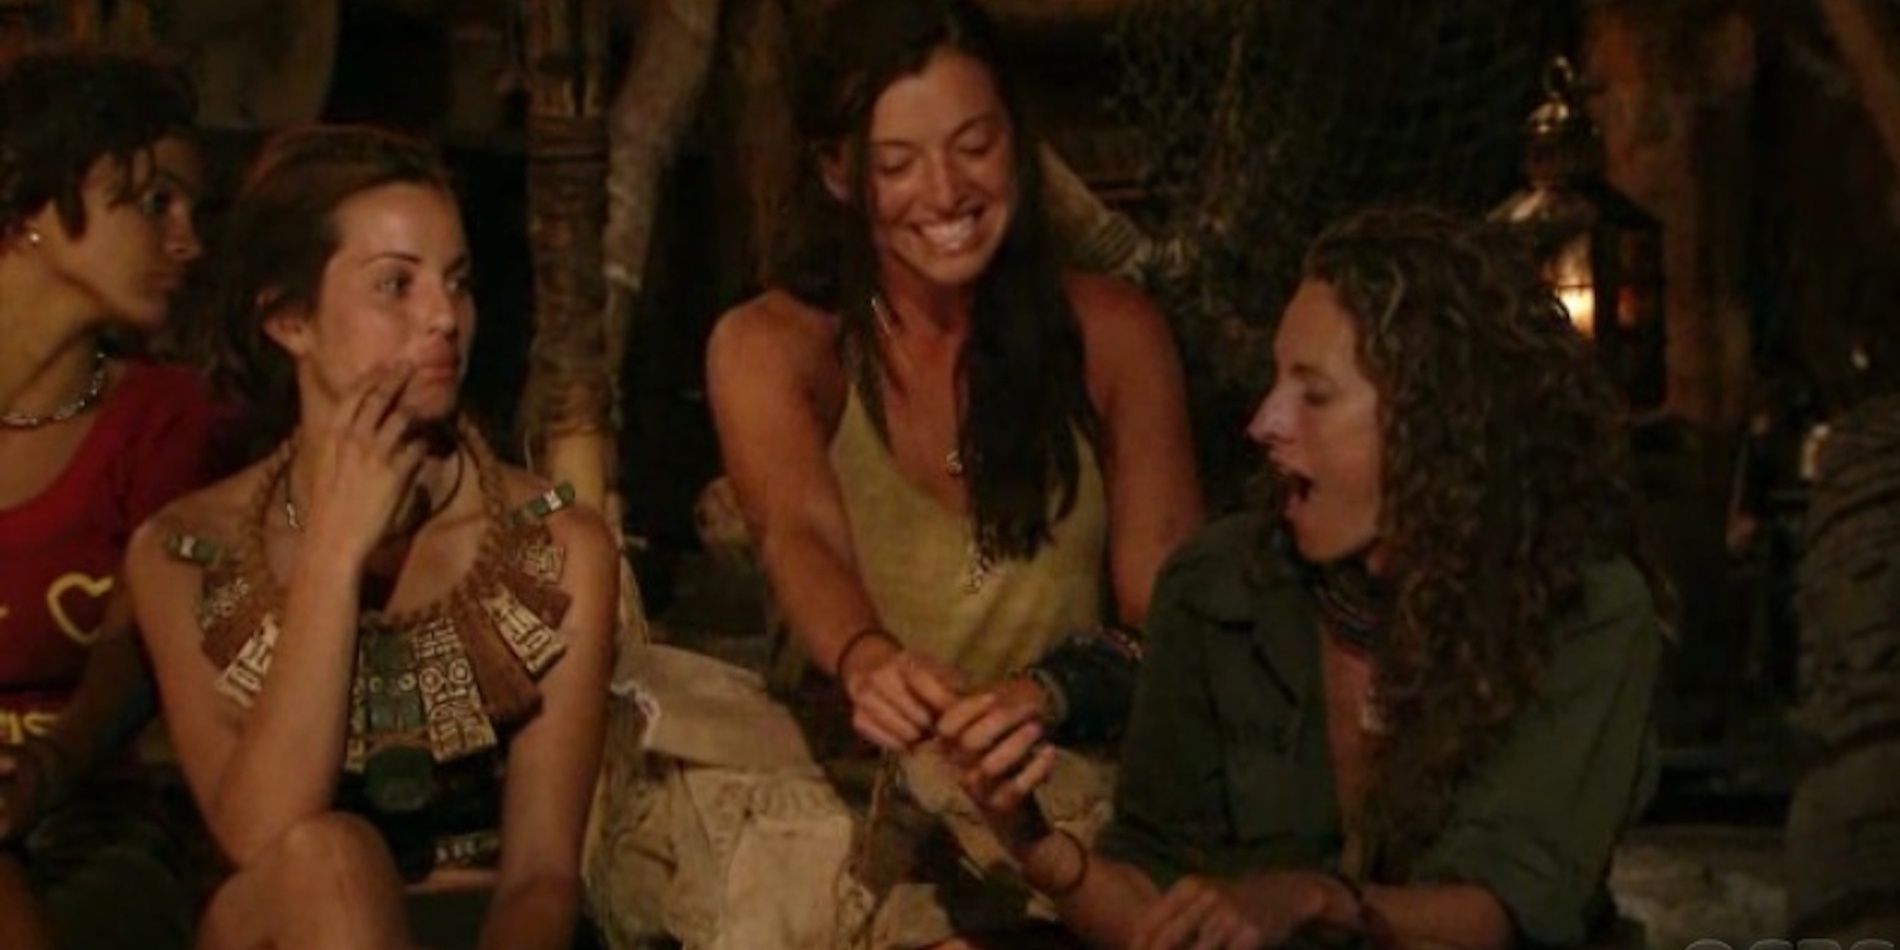 Parvati giving an idol to Jerri at tribal council